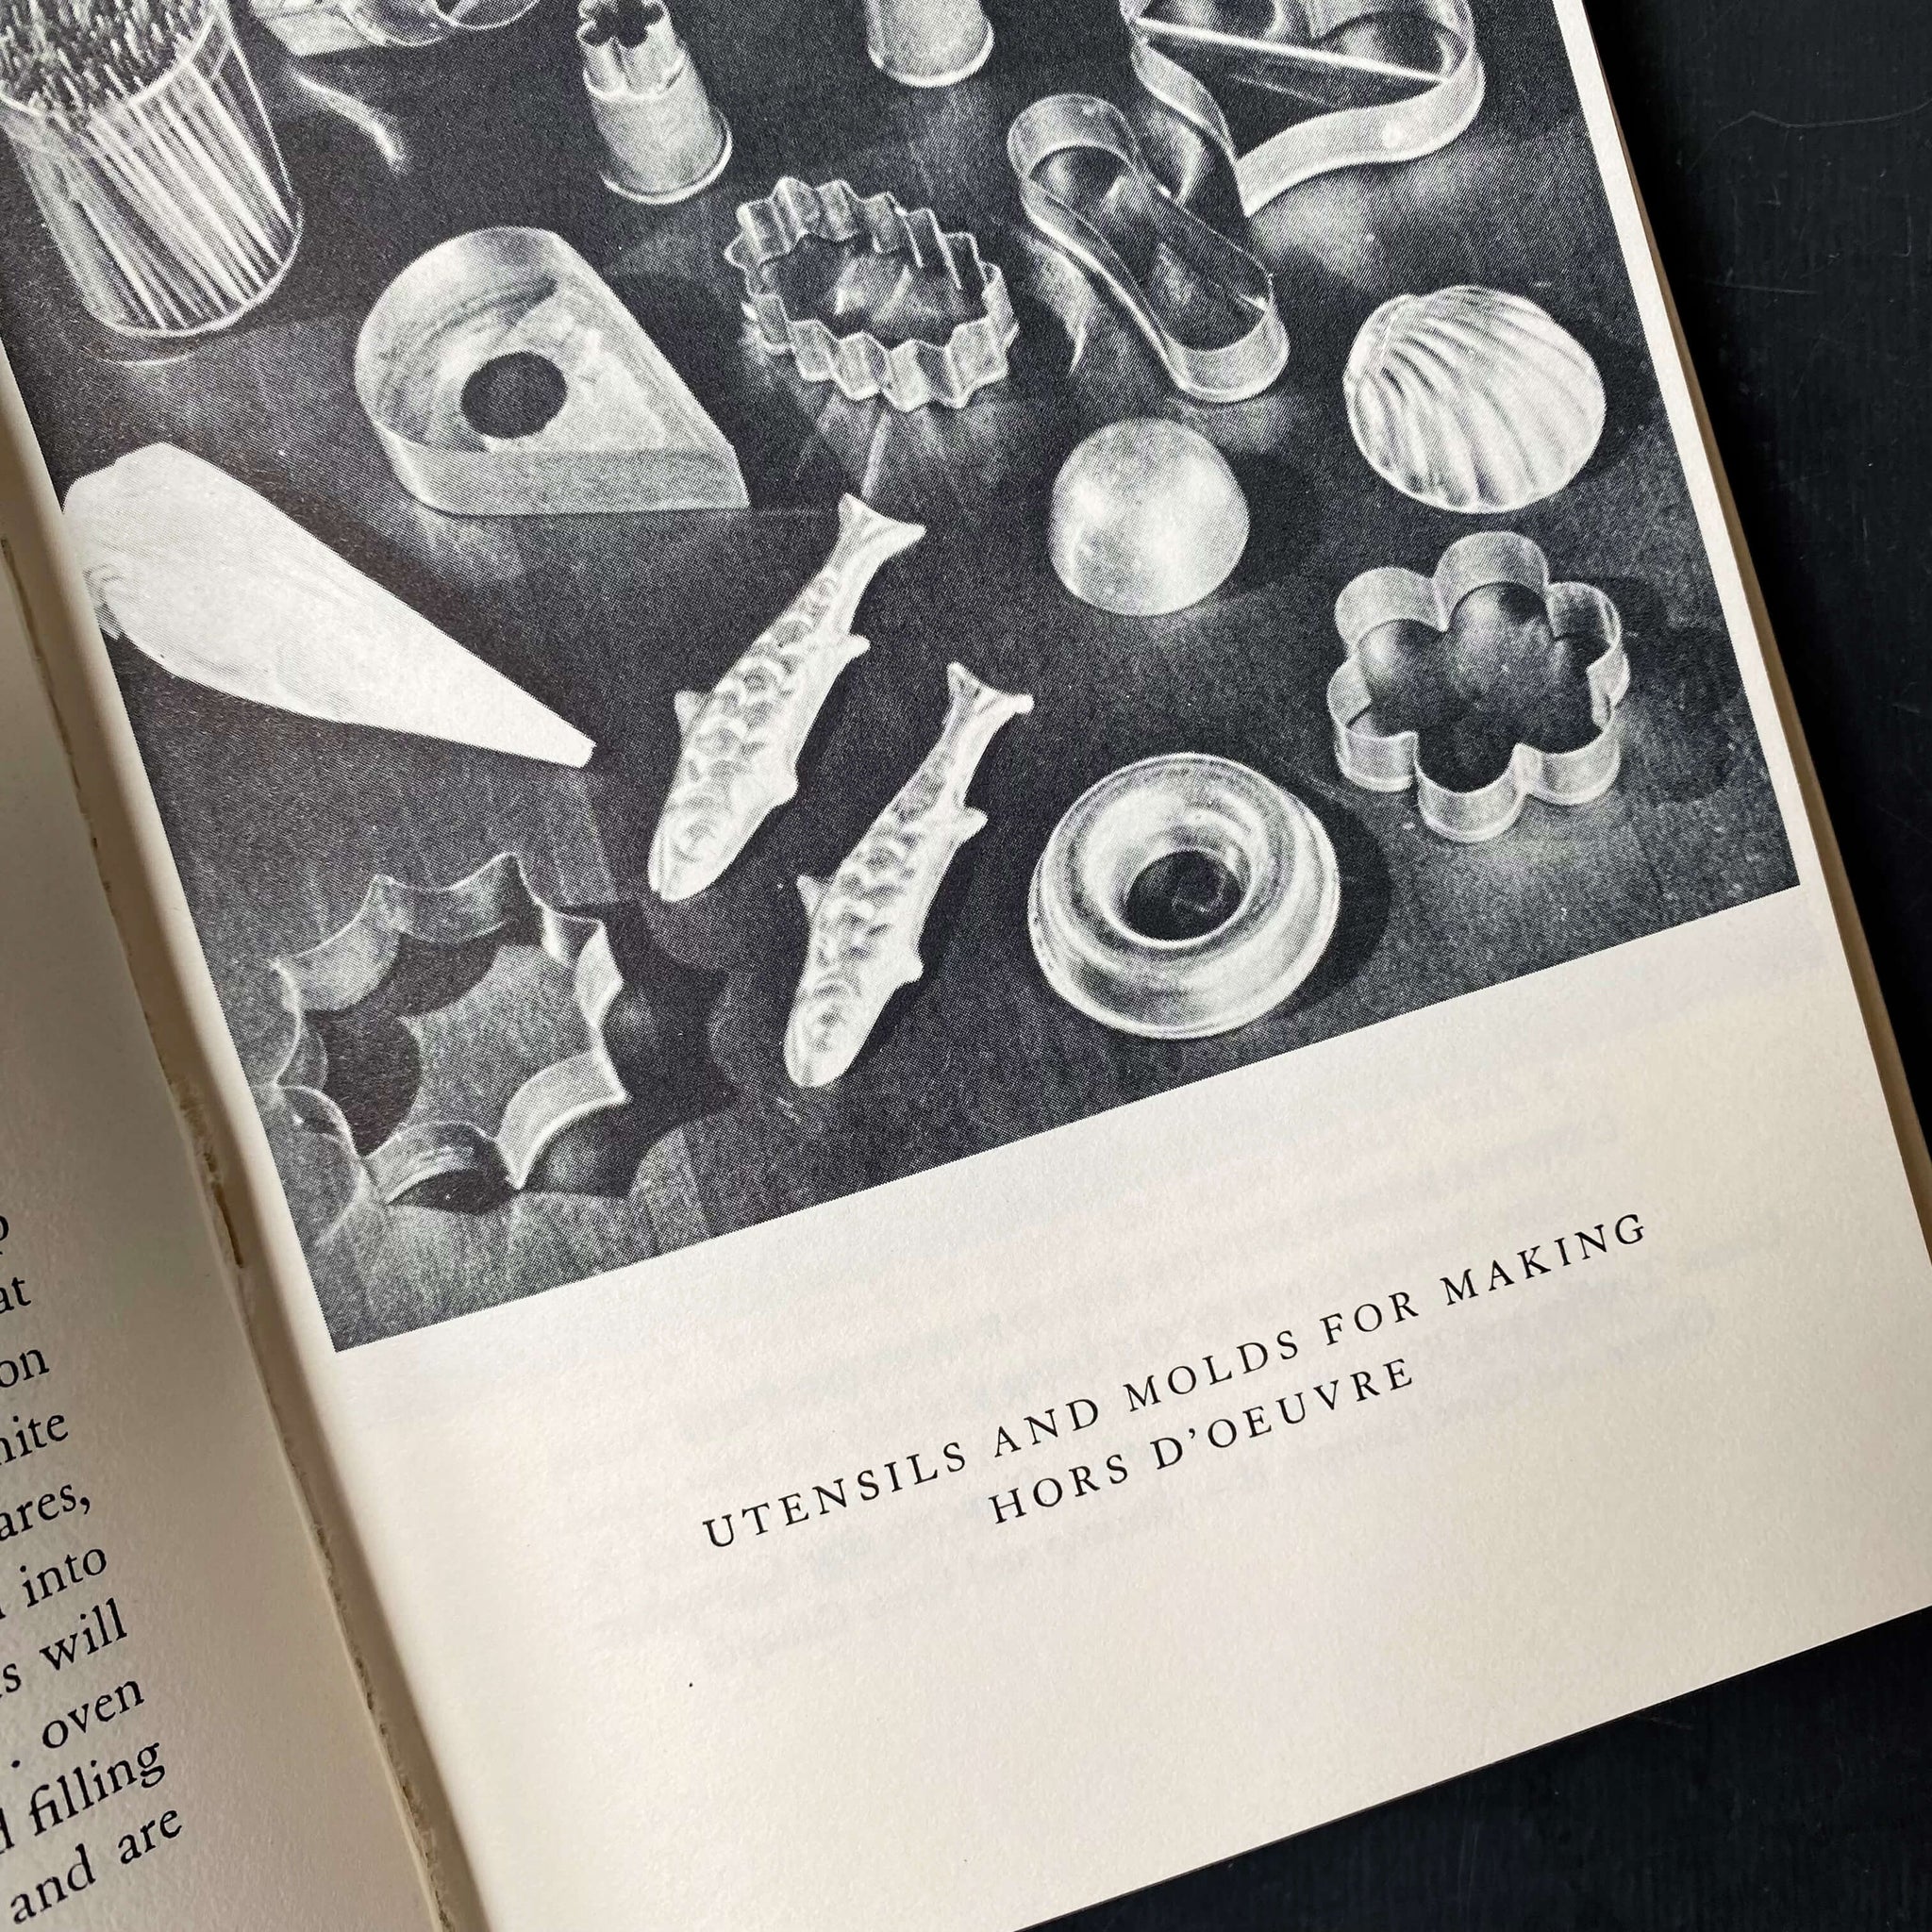 Vintage 1940s Hors d'Oeuvre and Canape Cookbook - A Book of Hors d'Oeuvre by Lucy G. Allen circa 1941